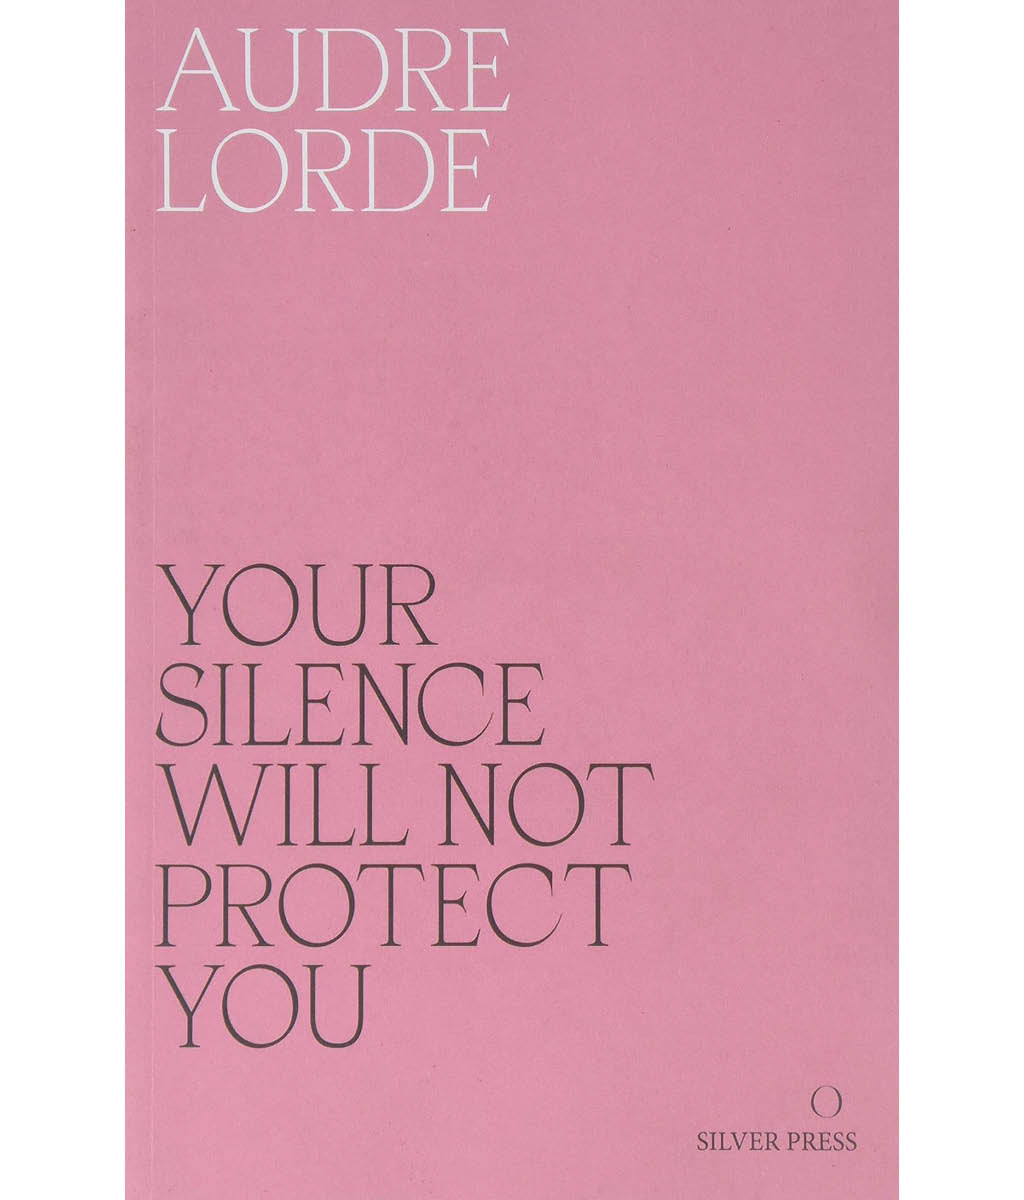 Your Silence Will Not Protect You Audre Lorde, Reni Eddo-Lodge, Sara Ahmed